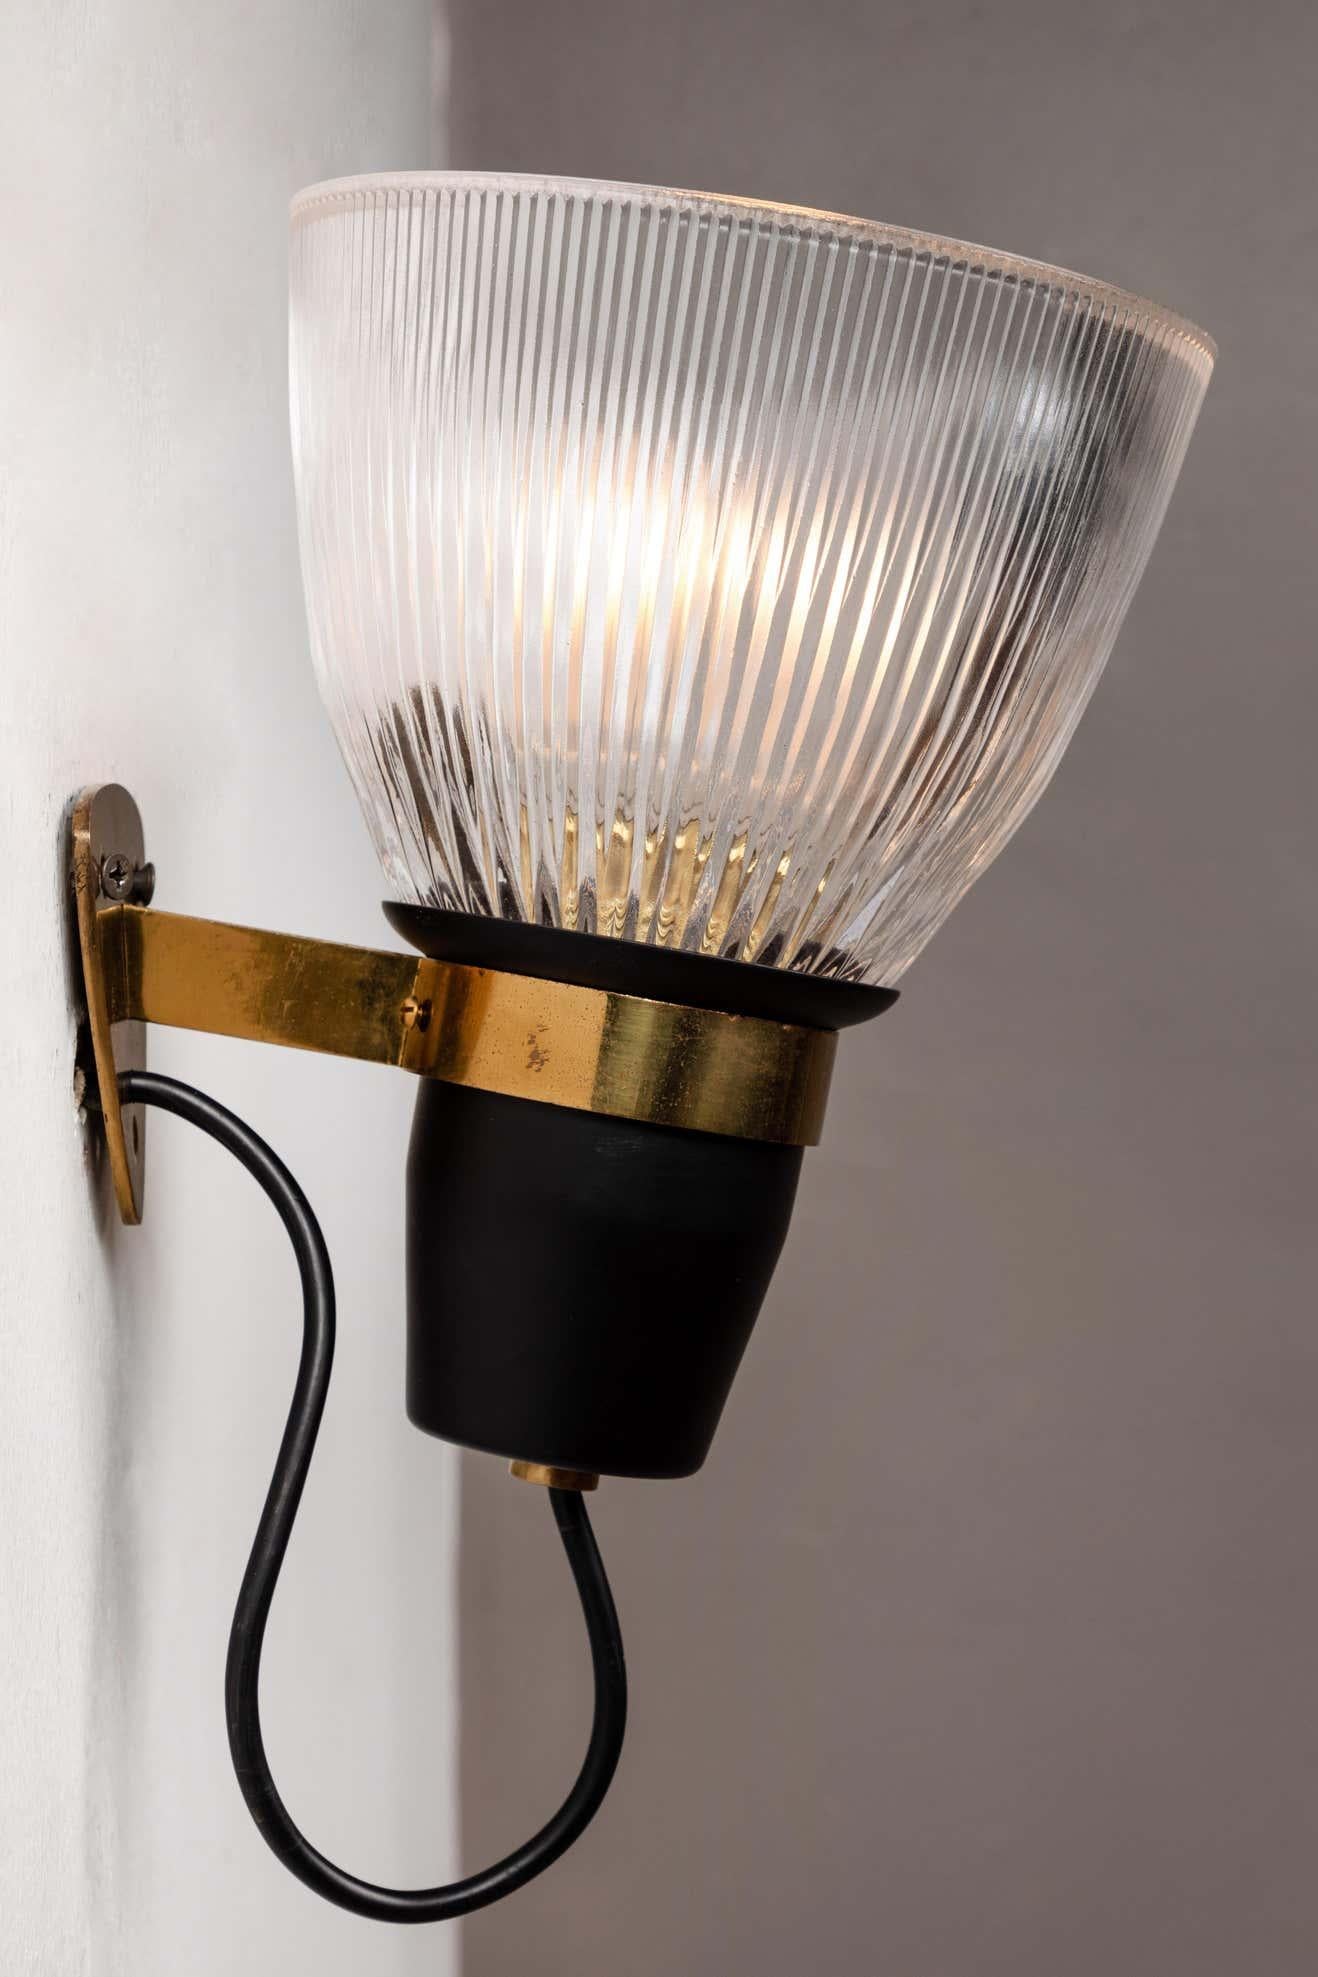 1950s Ignazio Gardella LP5 Sconces for Azucena. These iconic sconces are executed in opaline pressed glass, black painted metal and brass. Several of the lamps feature the 